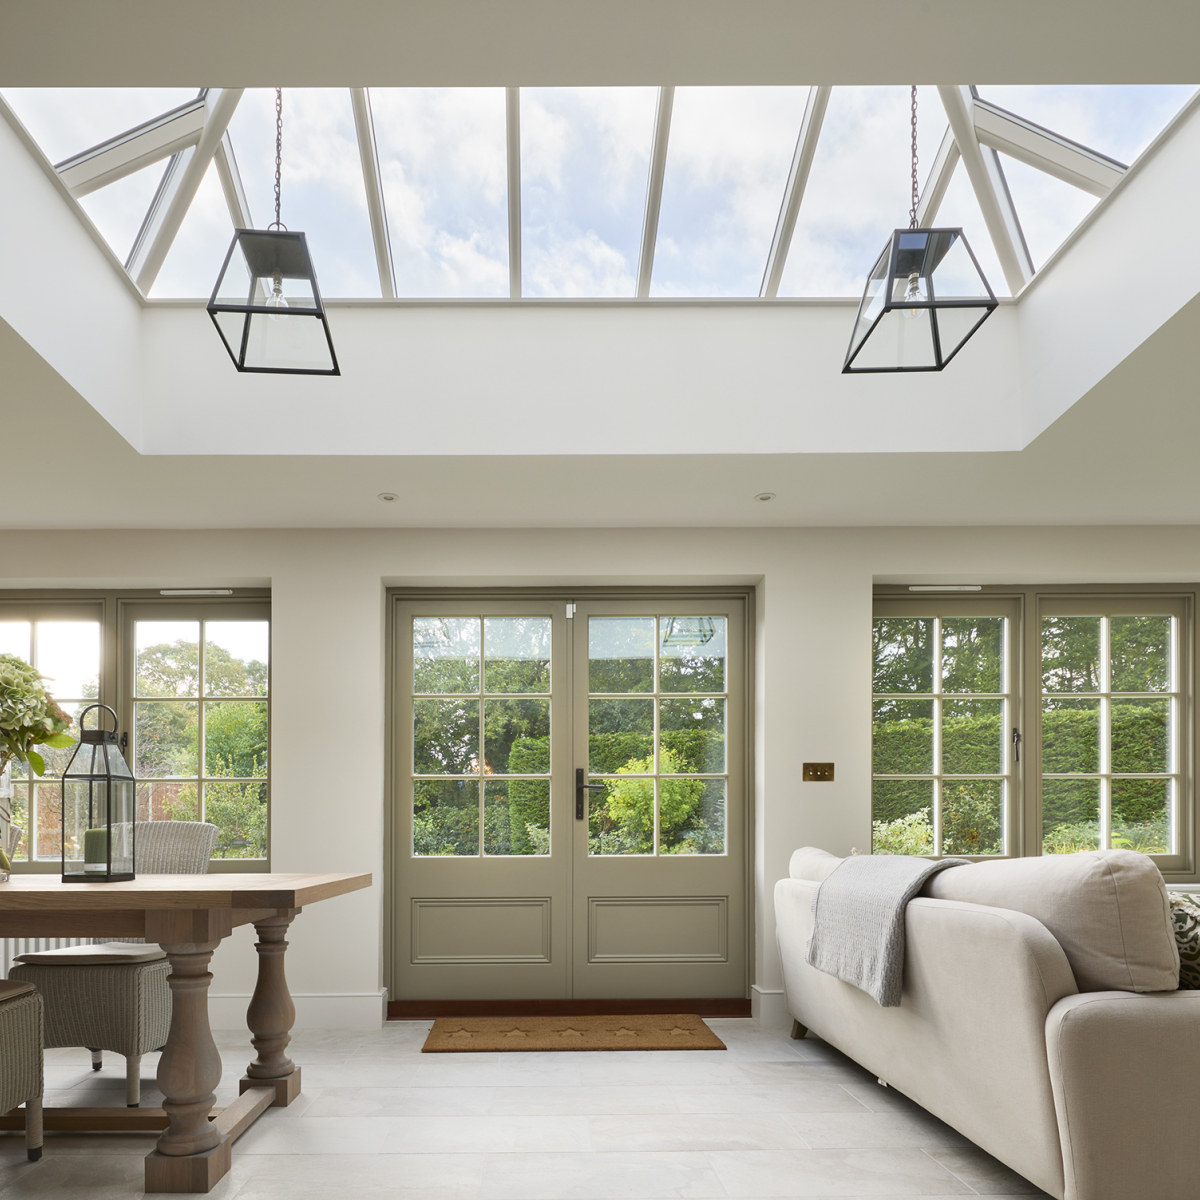 ROOF LANTERN FOR OPEN PLAN DINING AND LIVING AREA